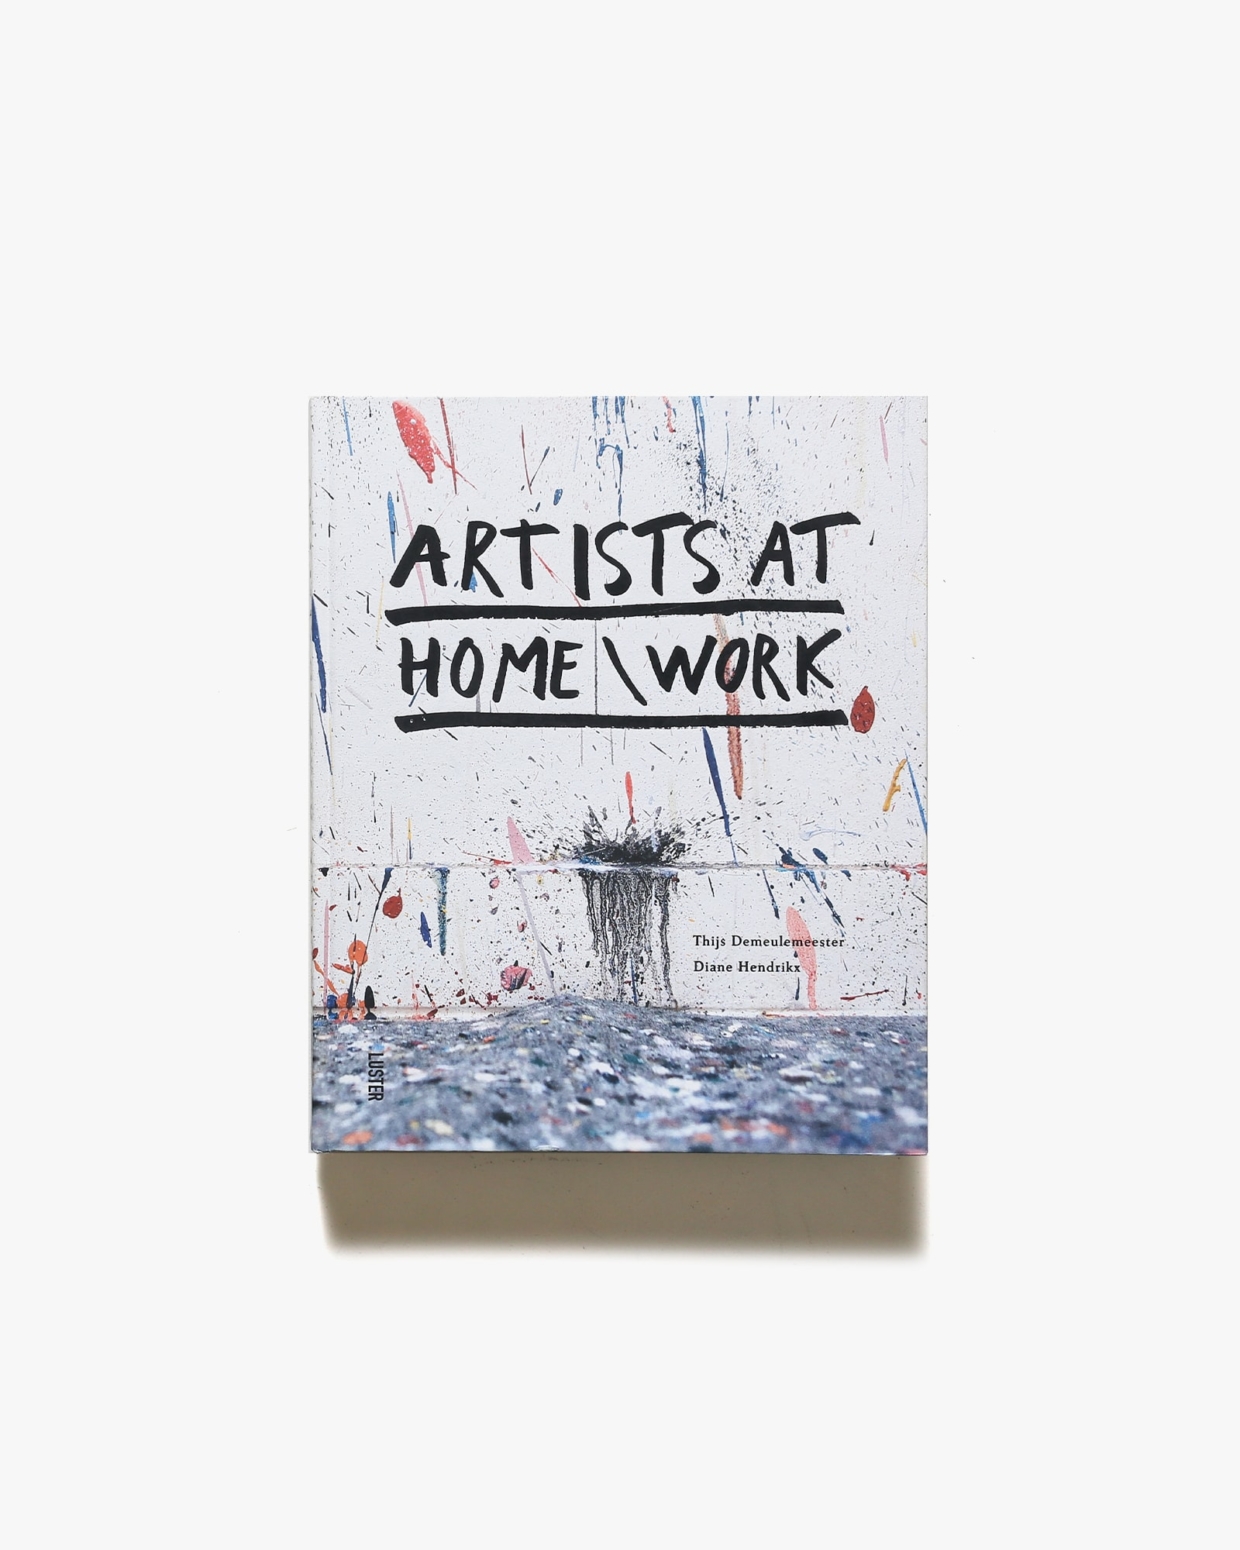 Artists at Home／Work | Thijs Demeulemeester